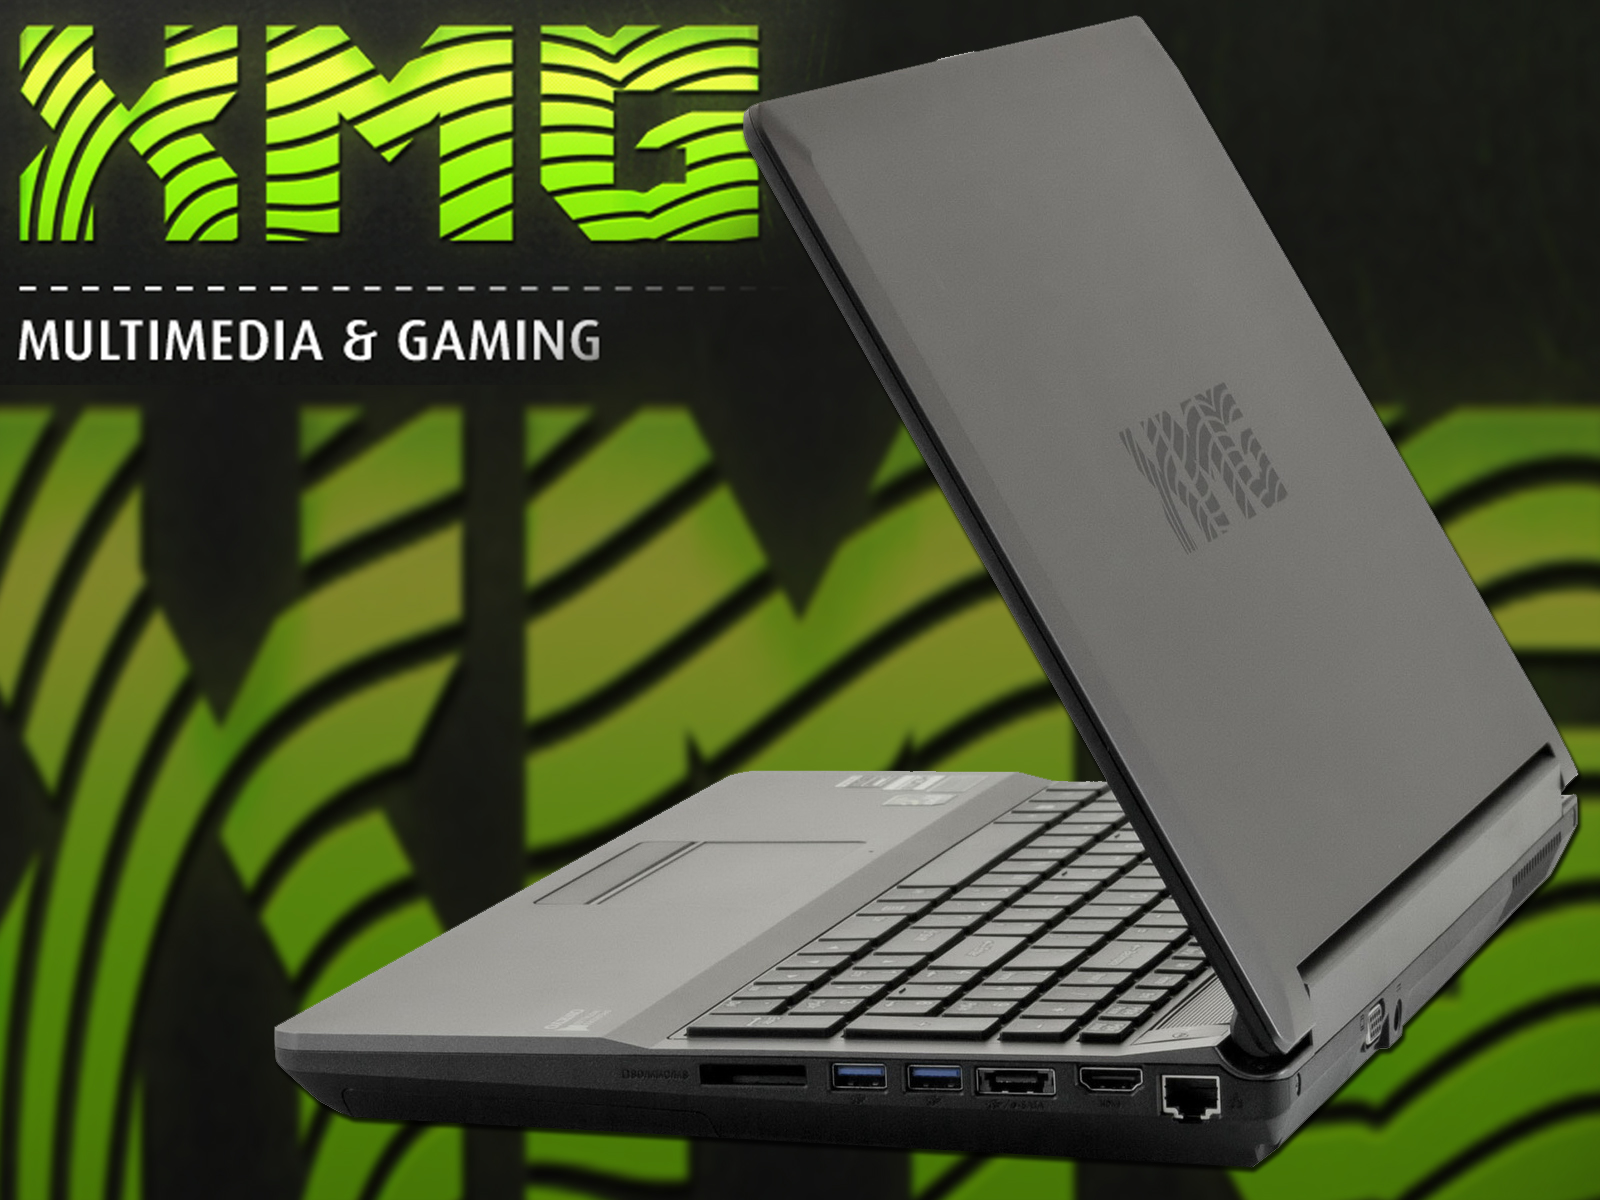 New Schenker XMG A523 and A723 outfitted with Haswell and GeForce GTX 765M graphics